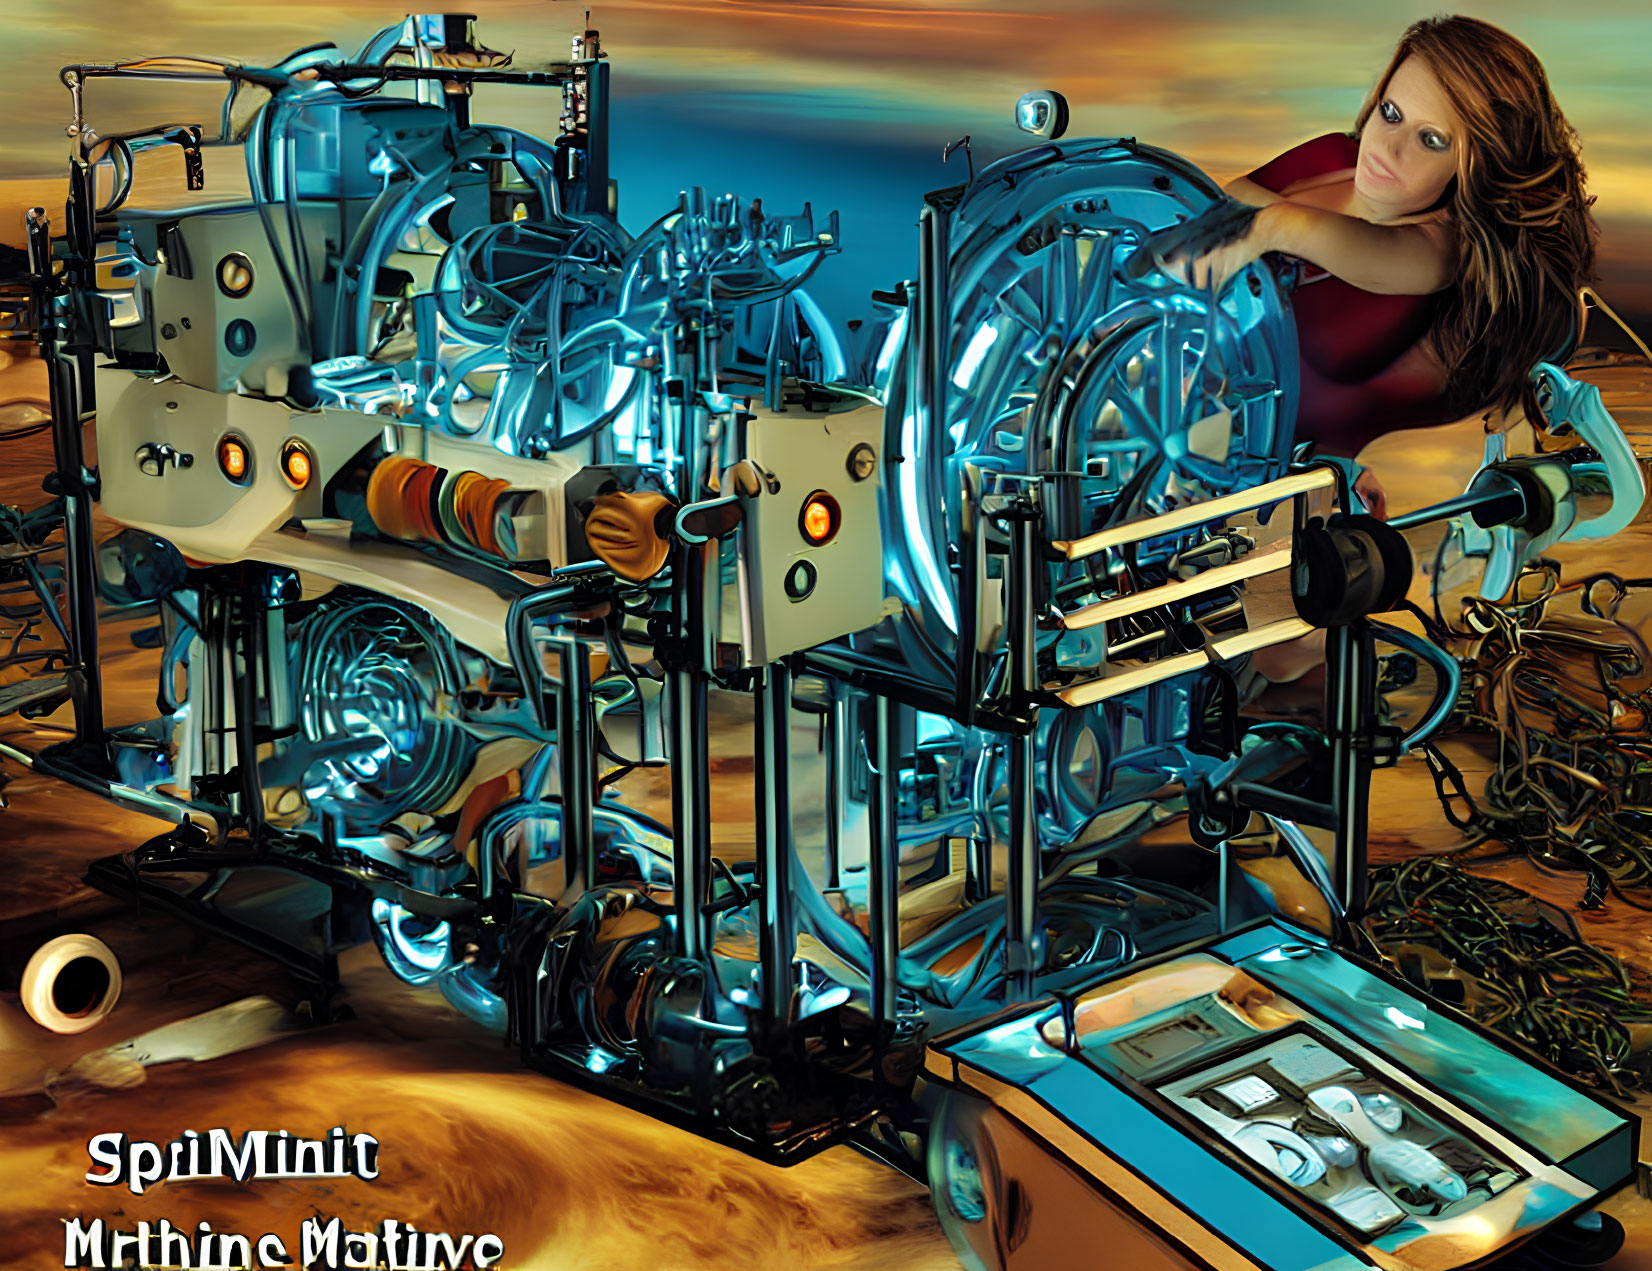 Woman leaning on steampunk machinery in surreal setting